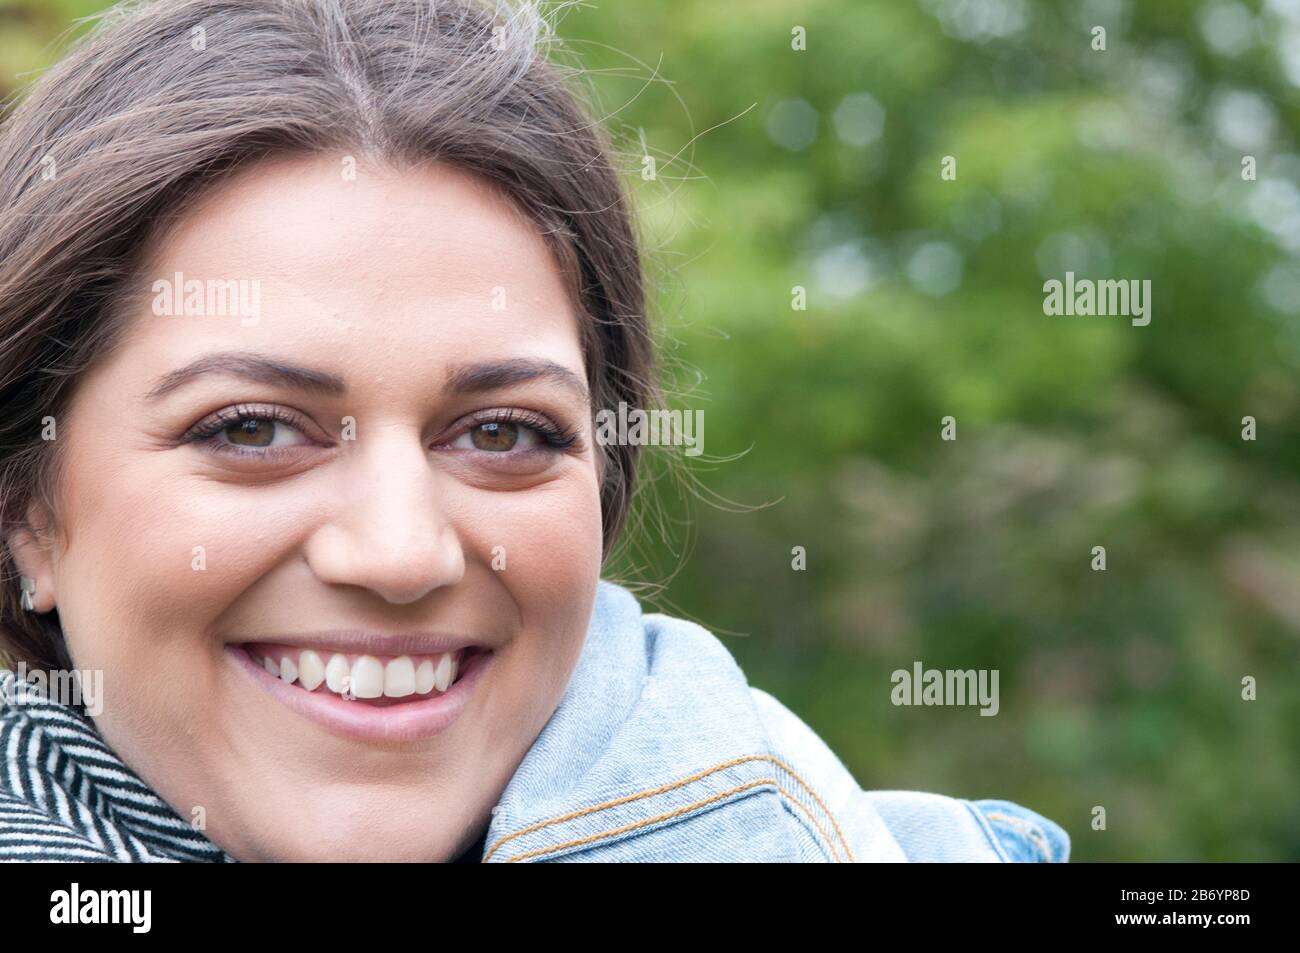 Close-up portrait of pretty young woman smiling Stock Photo